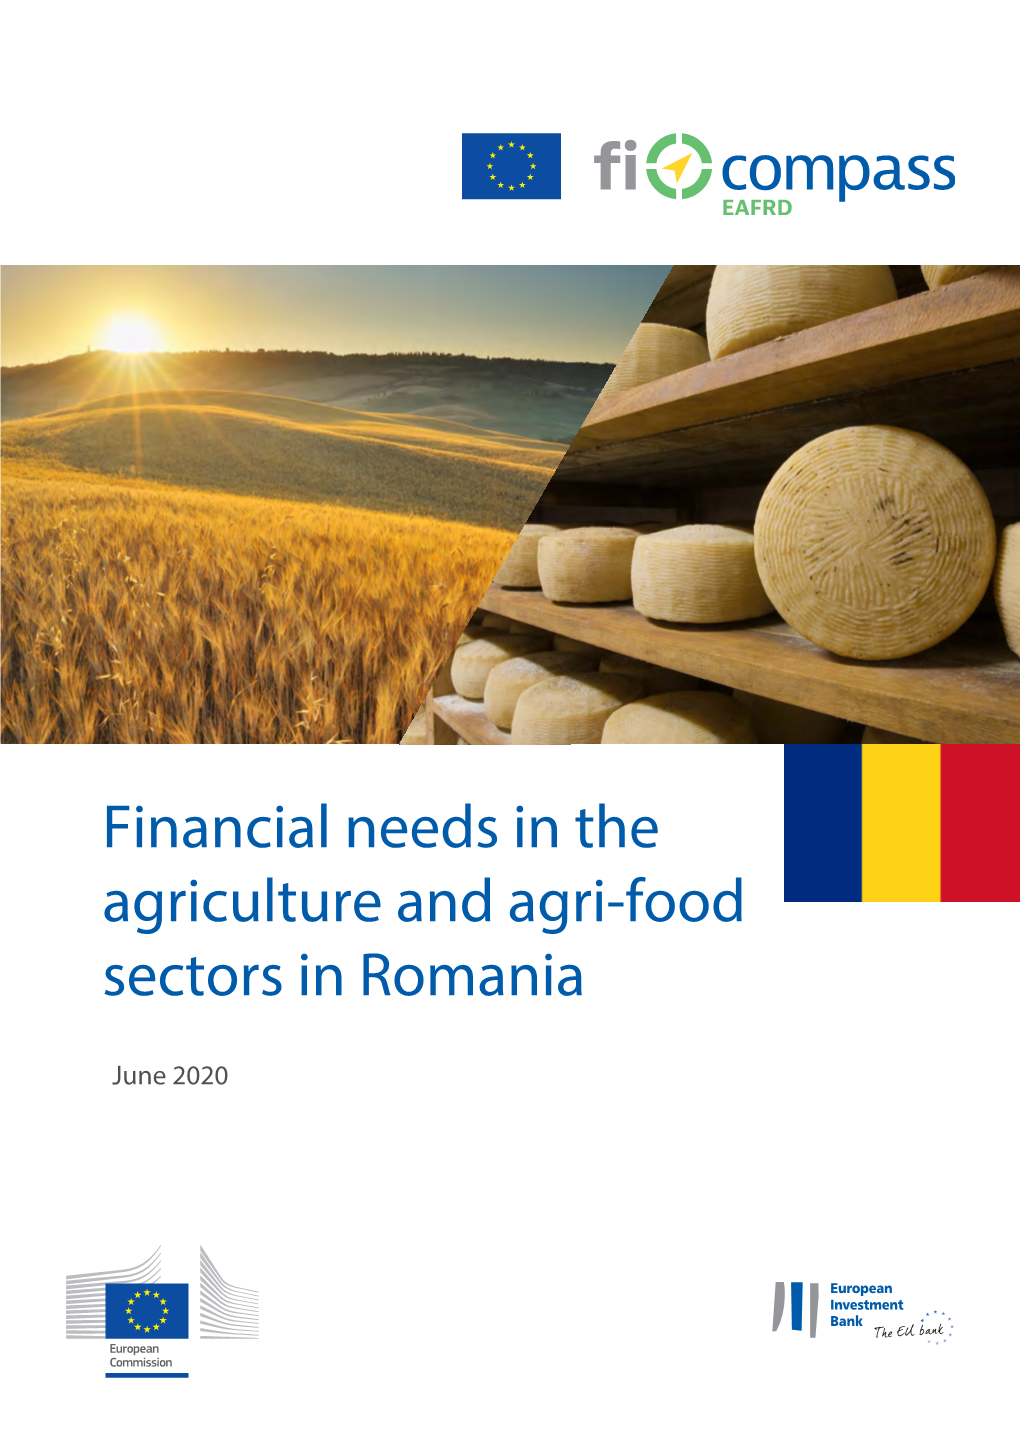 Financial Needs in the Agriculture and Agri-Food Sectors in Romania